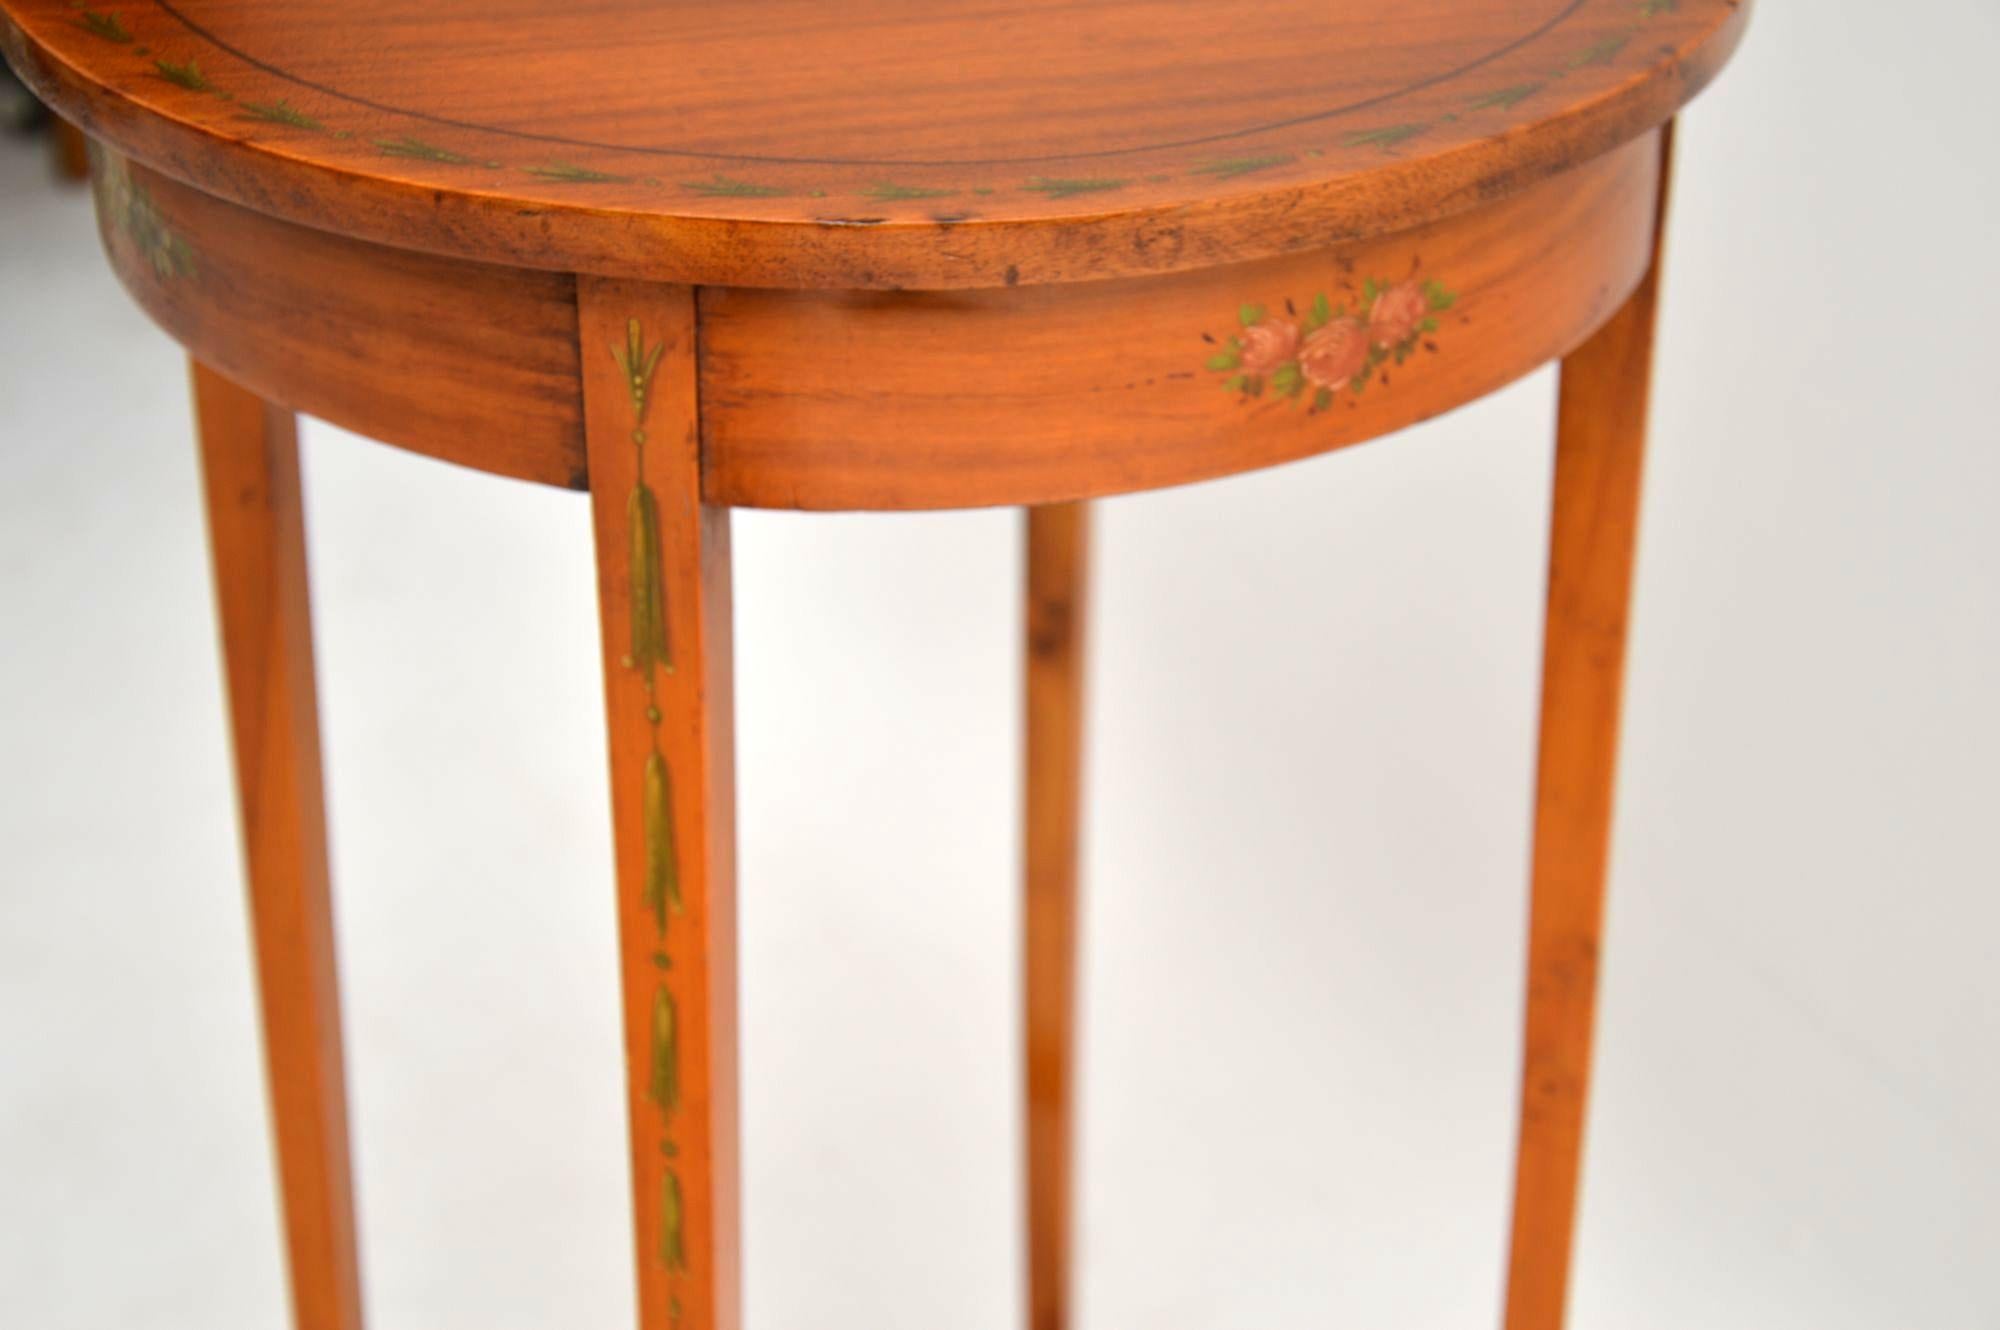 Antique Edwardian Painted Satin Wood Side Table 3